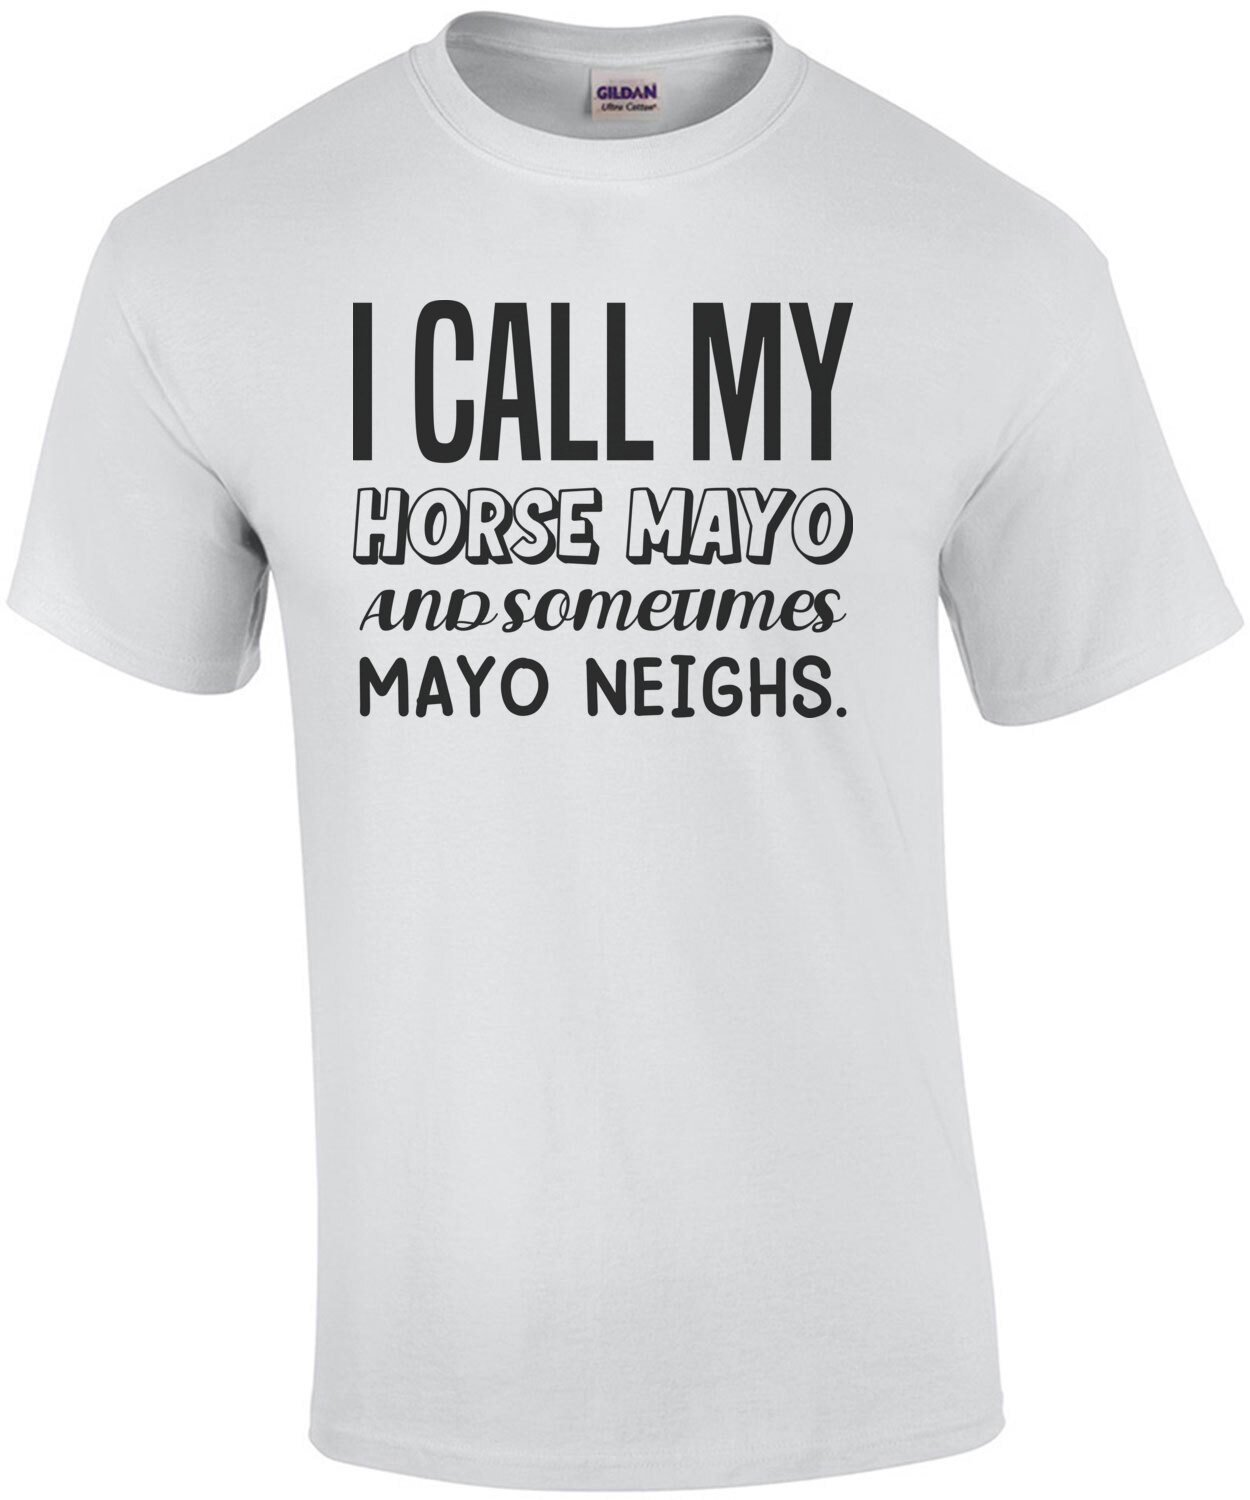 I call my horse Mayo and sometimes Mayo Neighs. funny pun t-shirt